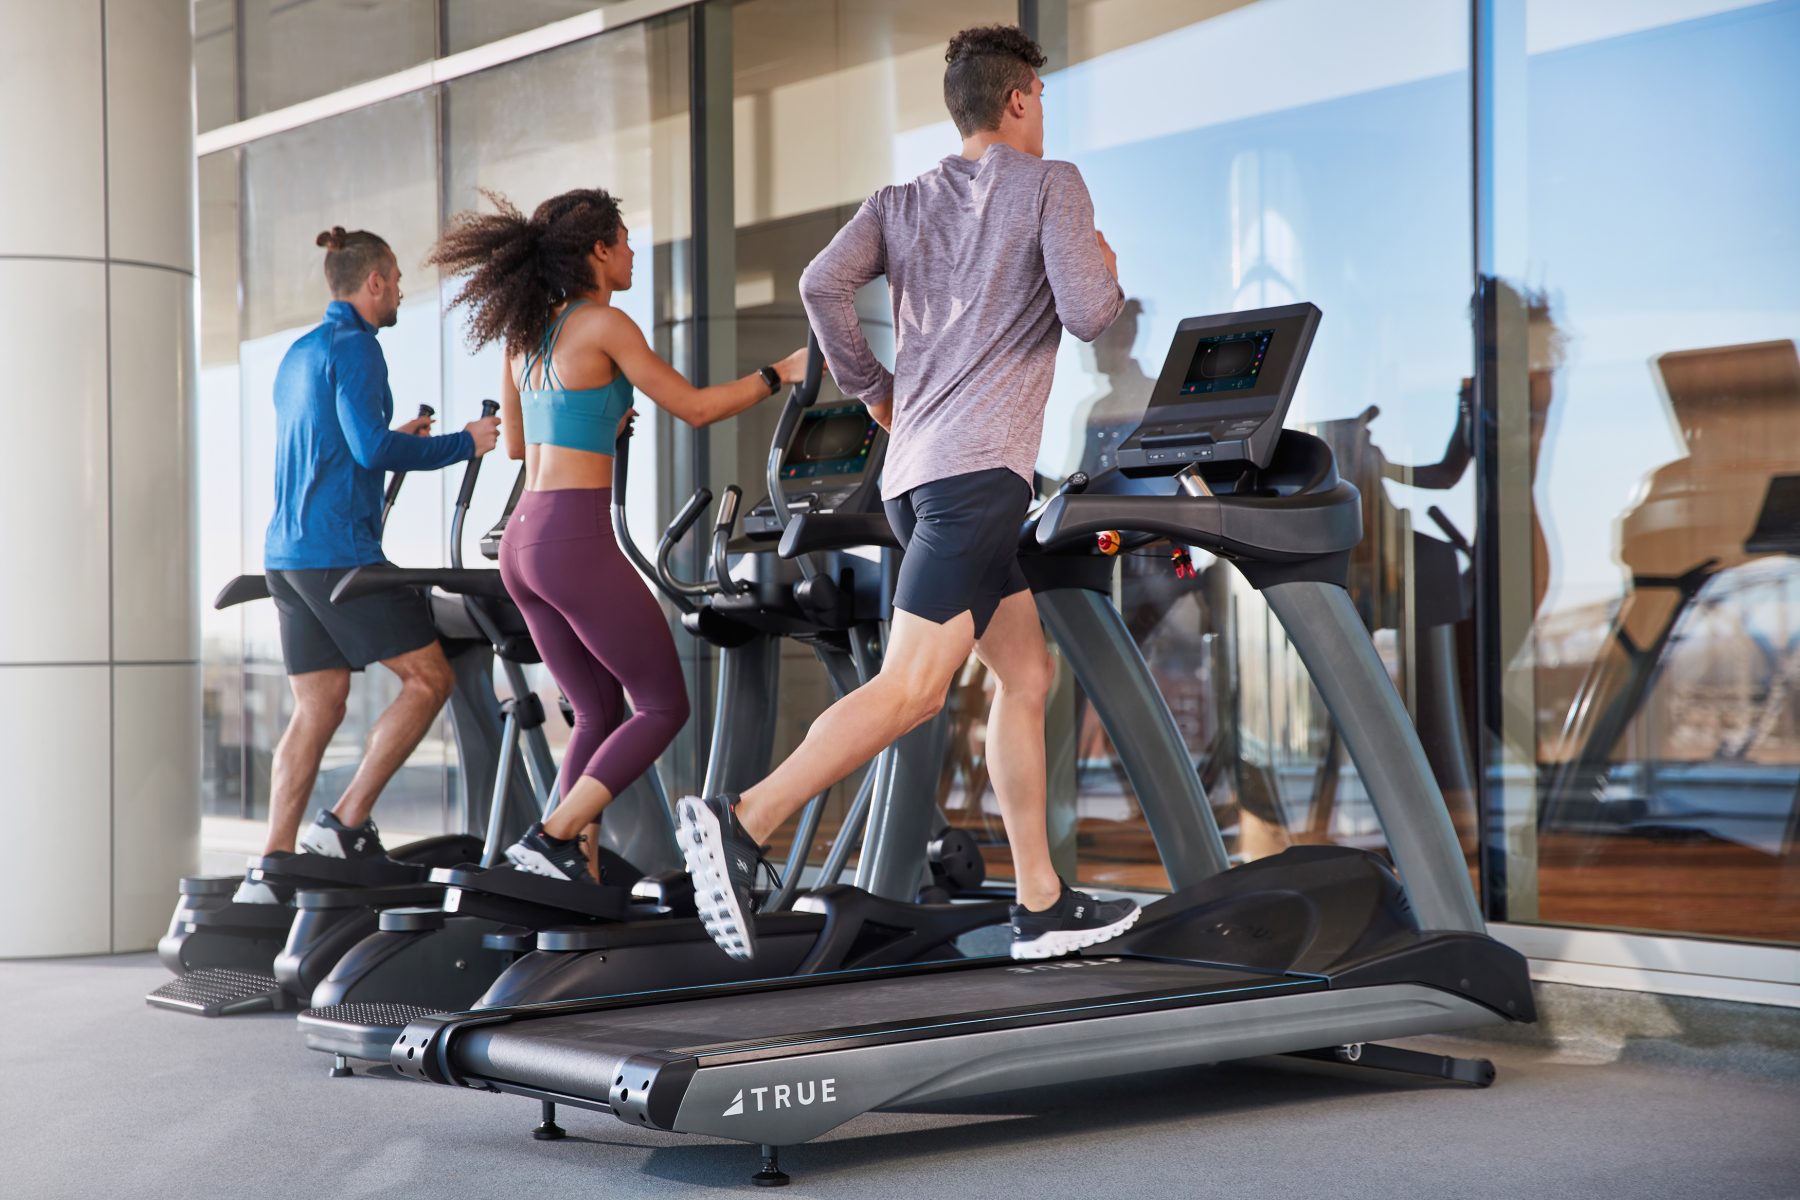 Commercial ellipticals are bing used with other equipment.